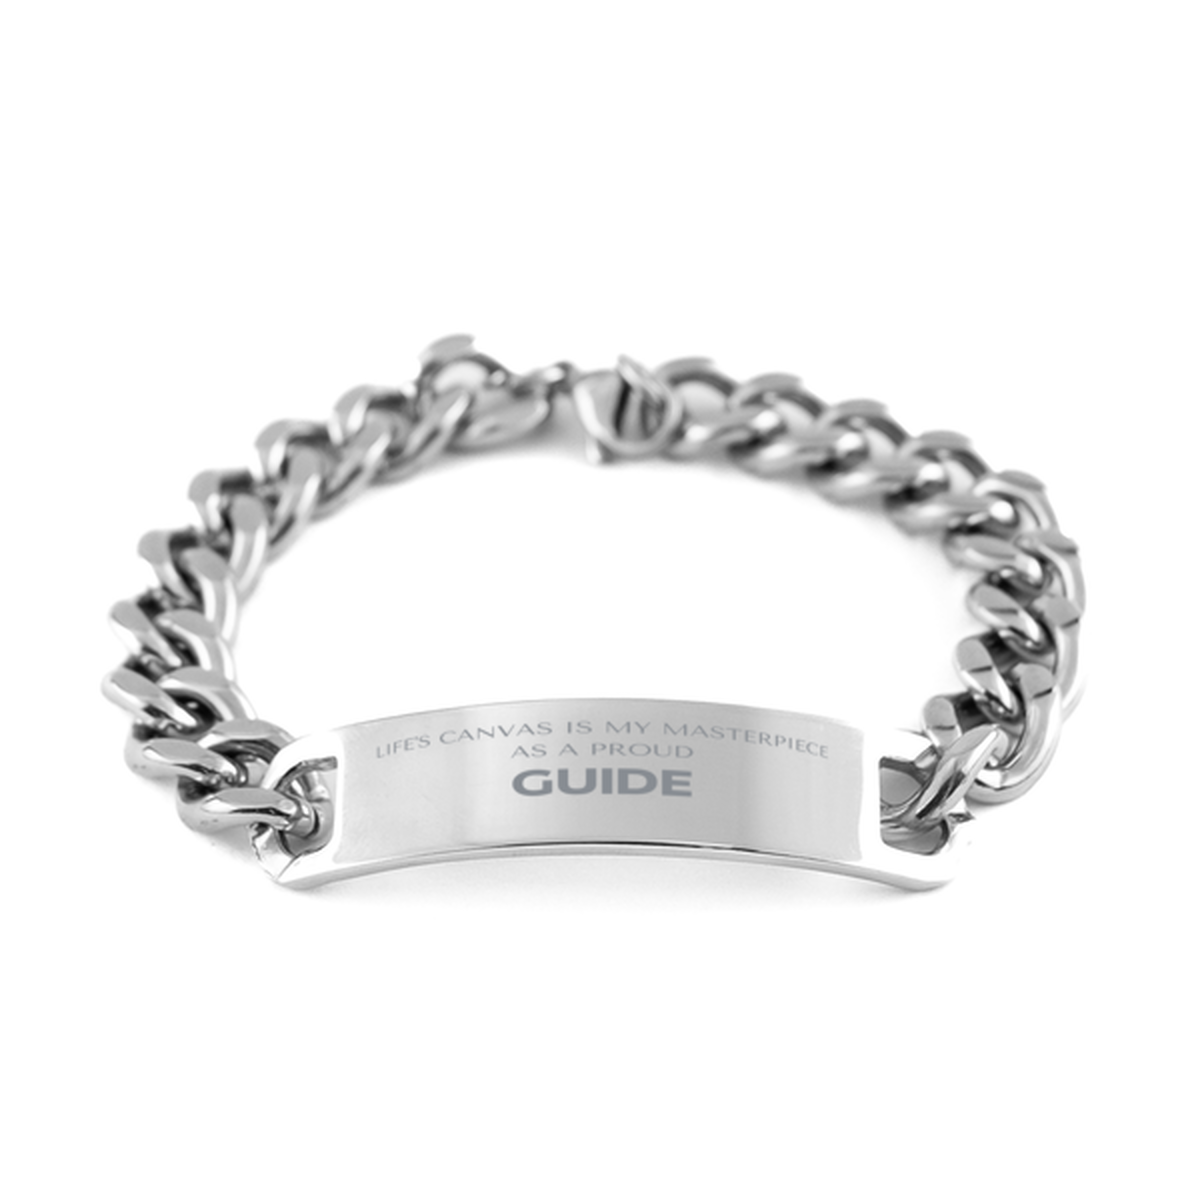 Proud Guide Gifts, Life's canvas is my masterpiece, Epic Birthday Christmas Unique Cuban Chain Stainless Steel Bracelet For Guide, Coworkers, Men, Women, Friends